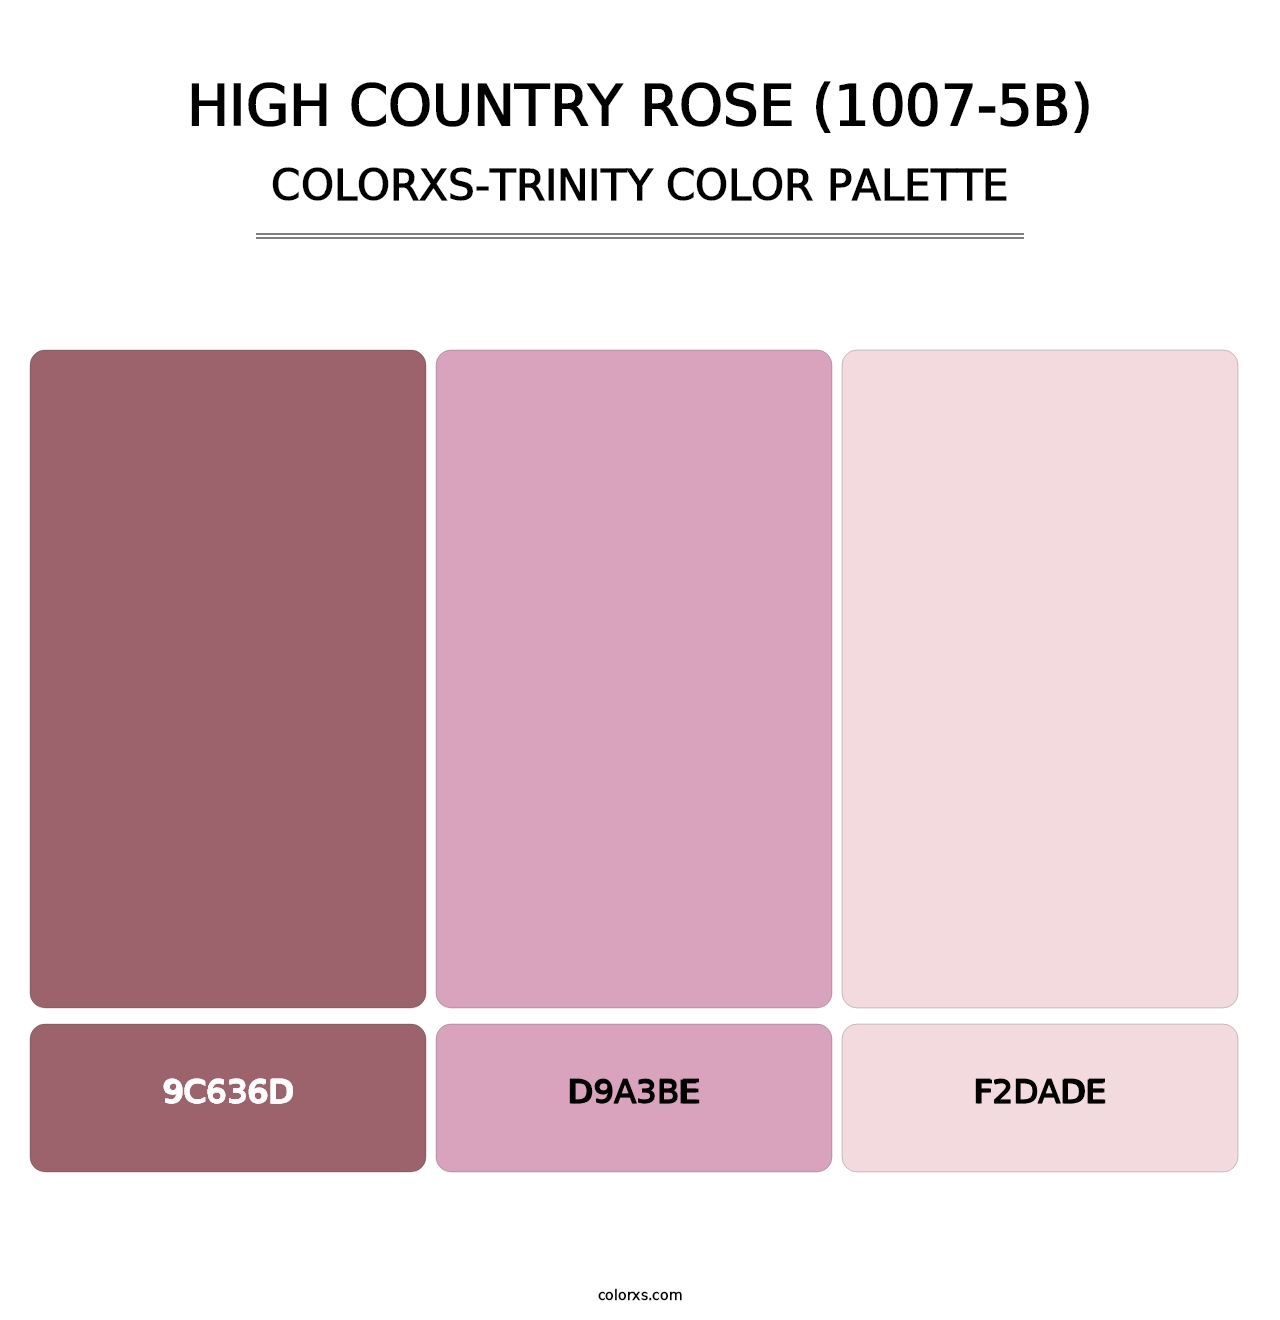 High Country Rose (1007-5B) - Colorxs Trinity Palette